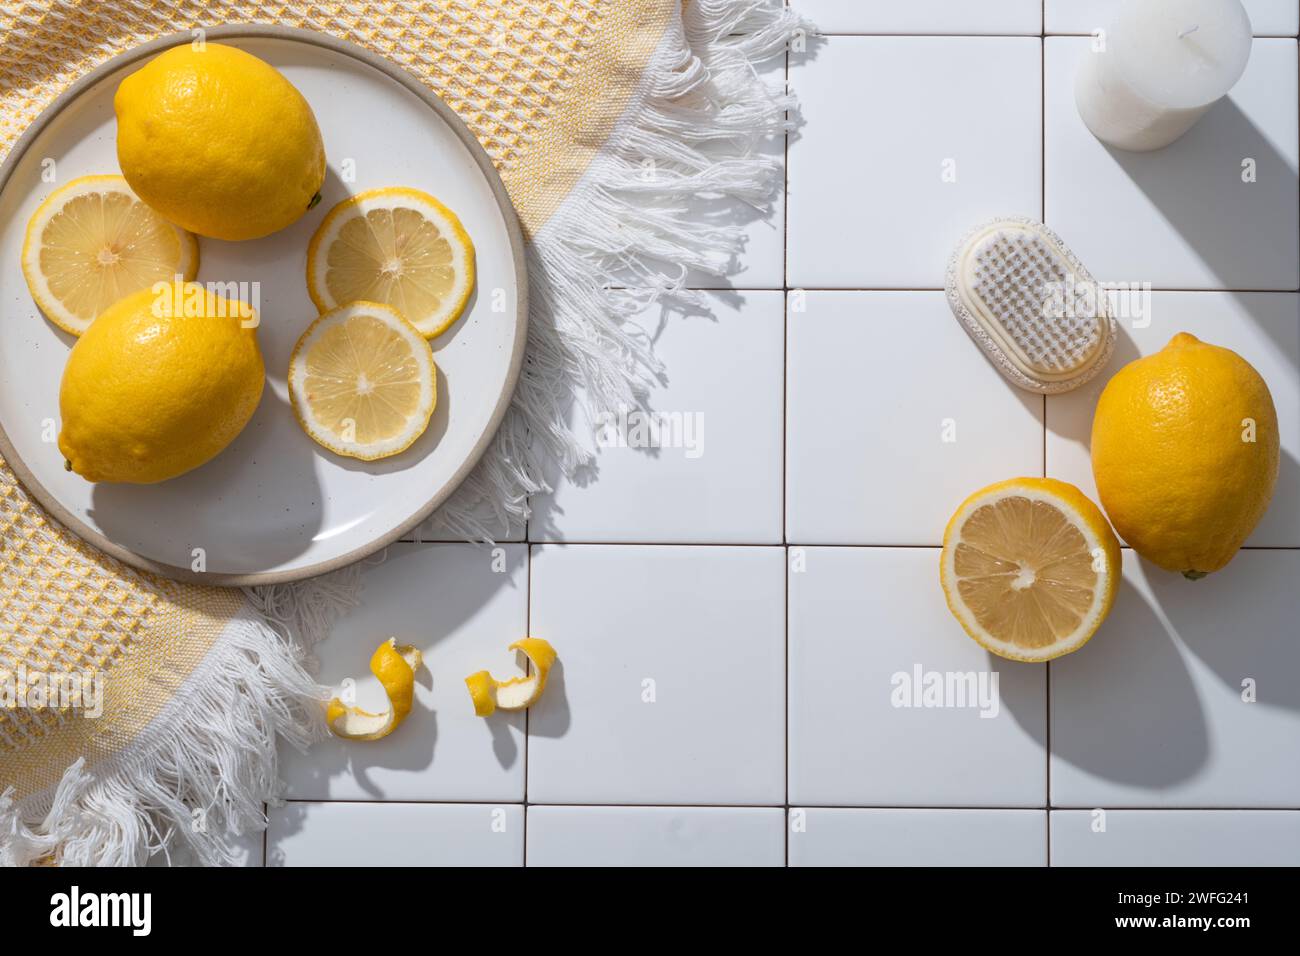 A dish of Lemon slices placed on a wool scarf decorated with candle and a scrub brush. Blank space for product presentation. Copy space. The benefits Stock Photo